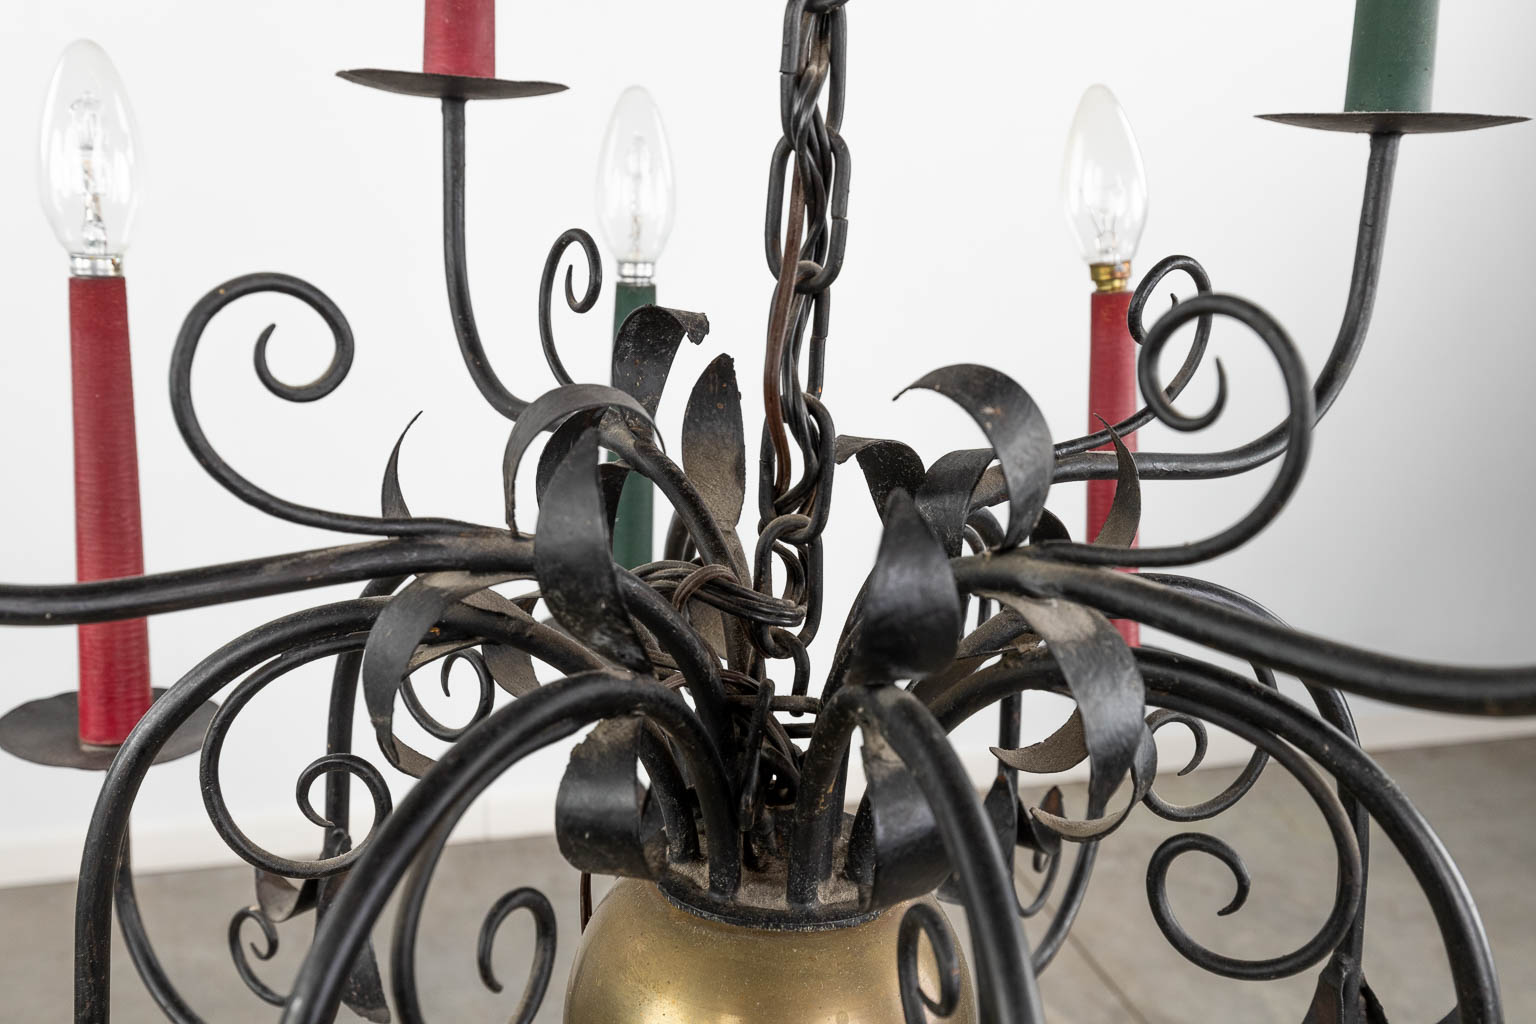 A Chandelier, copper and wrought iron. Circa 1950. (H:71 x D:67 cm)